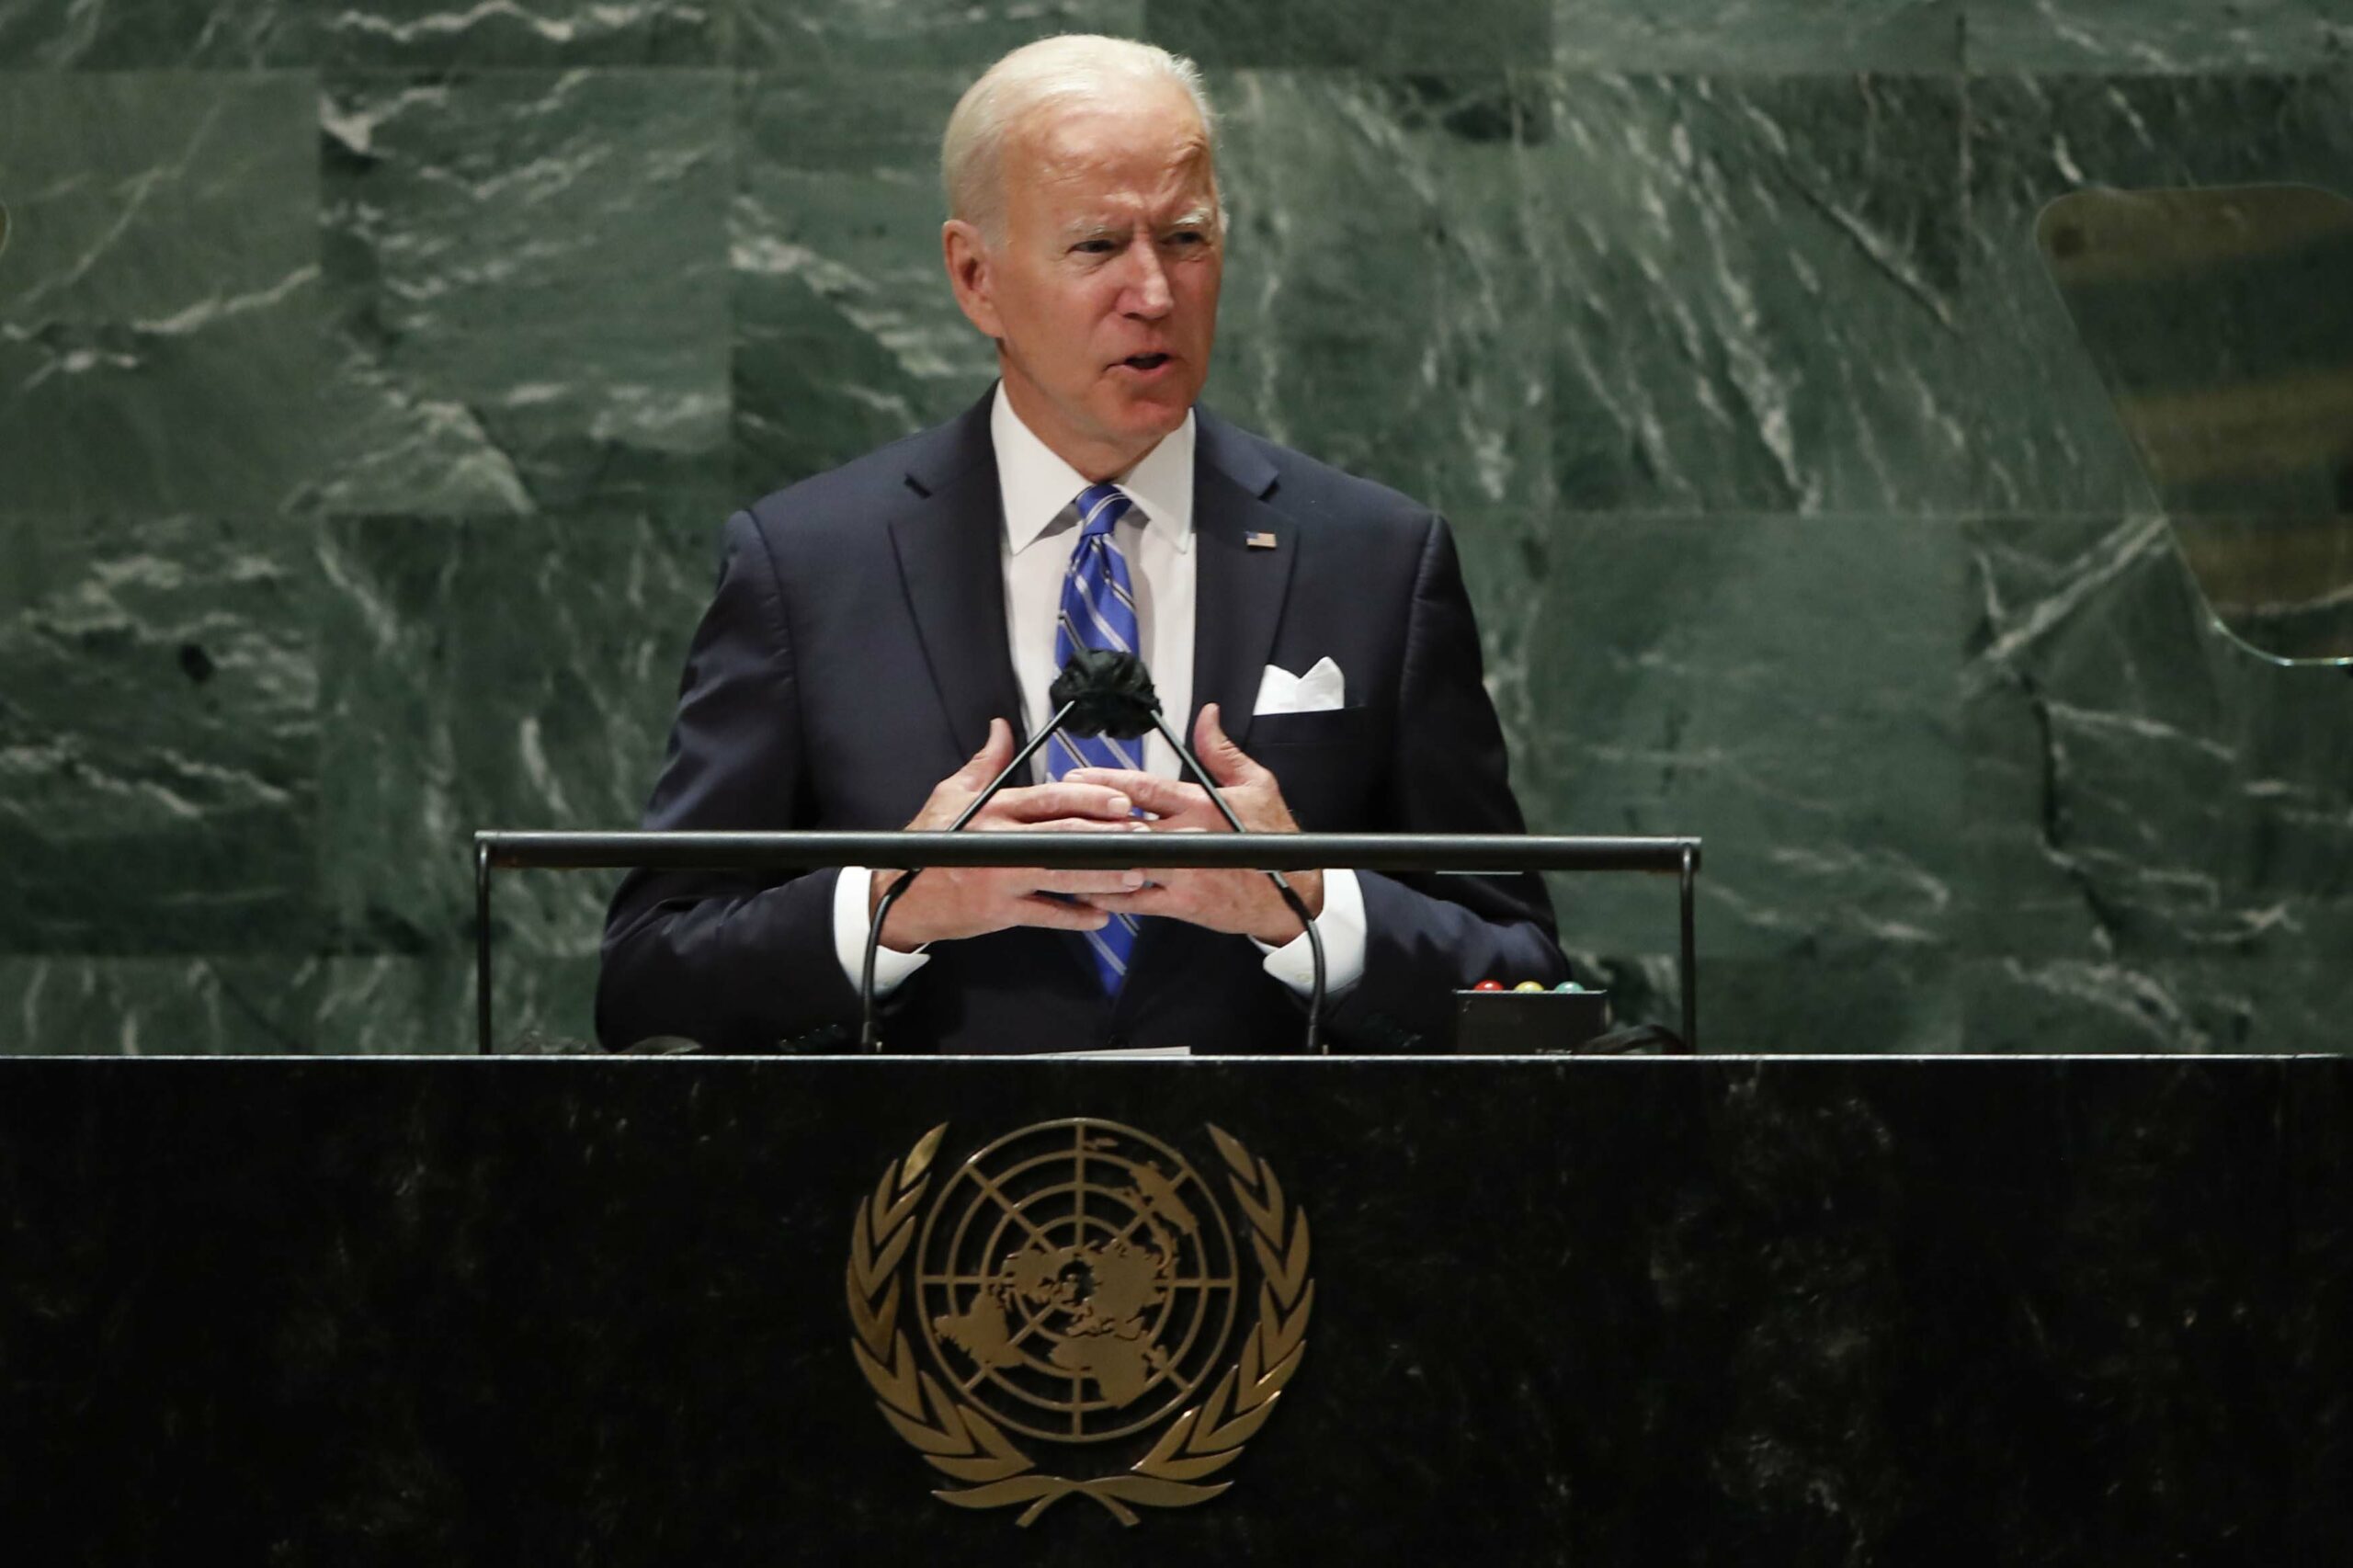 Biden says U.S. will quadruple climate aid to poor countries